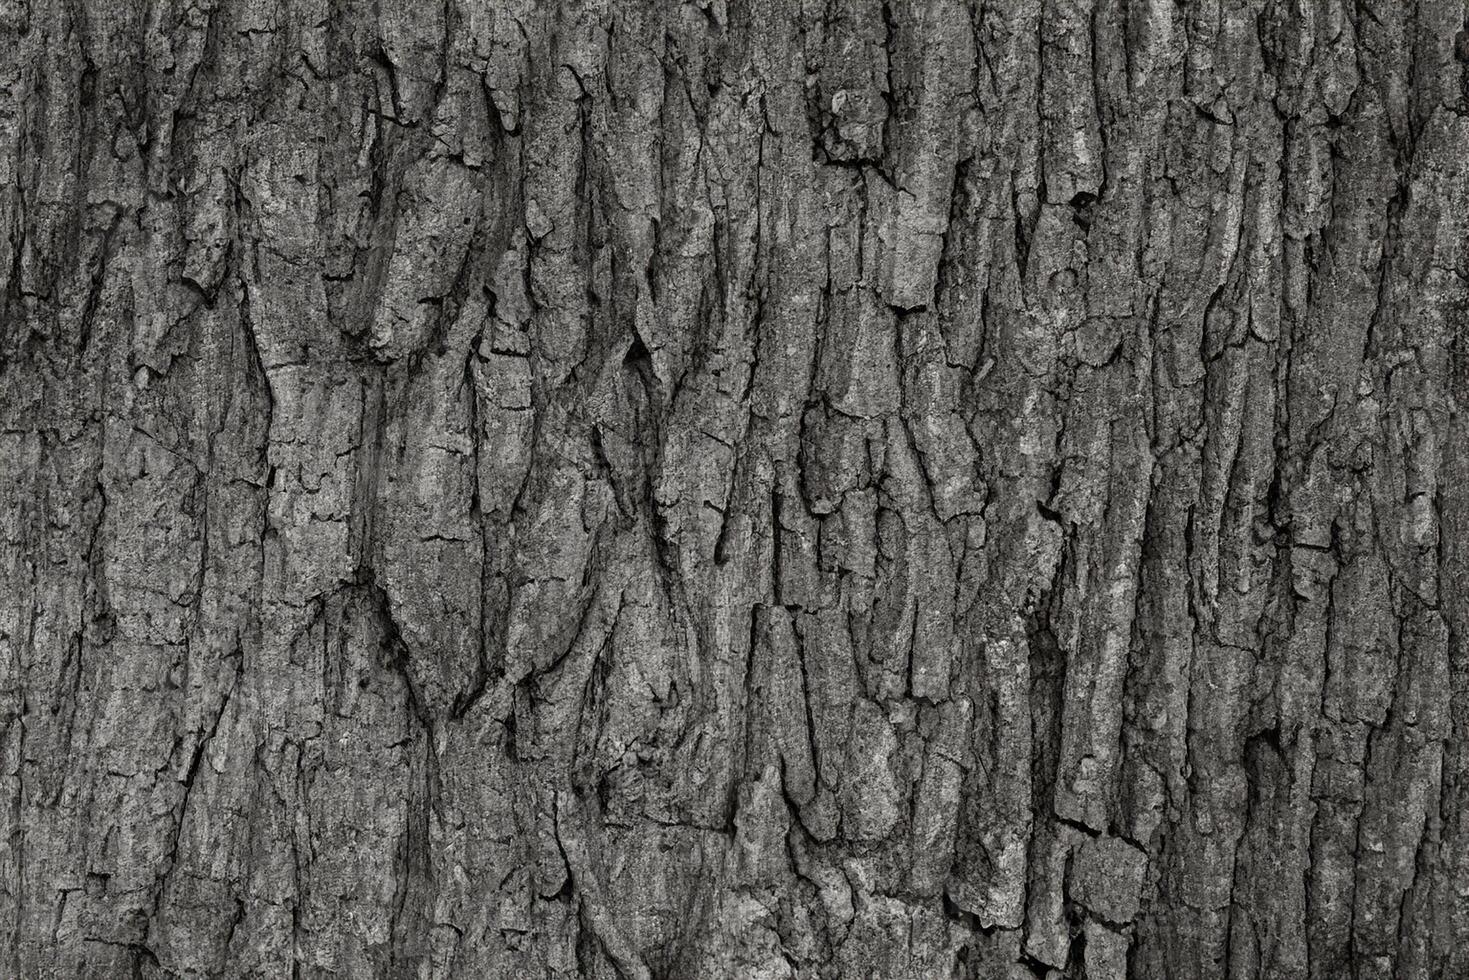 dry tree bark texture and background, nature concept photo